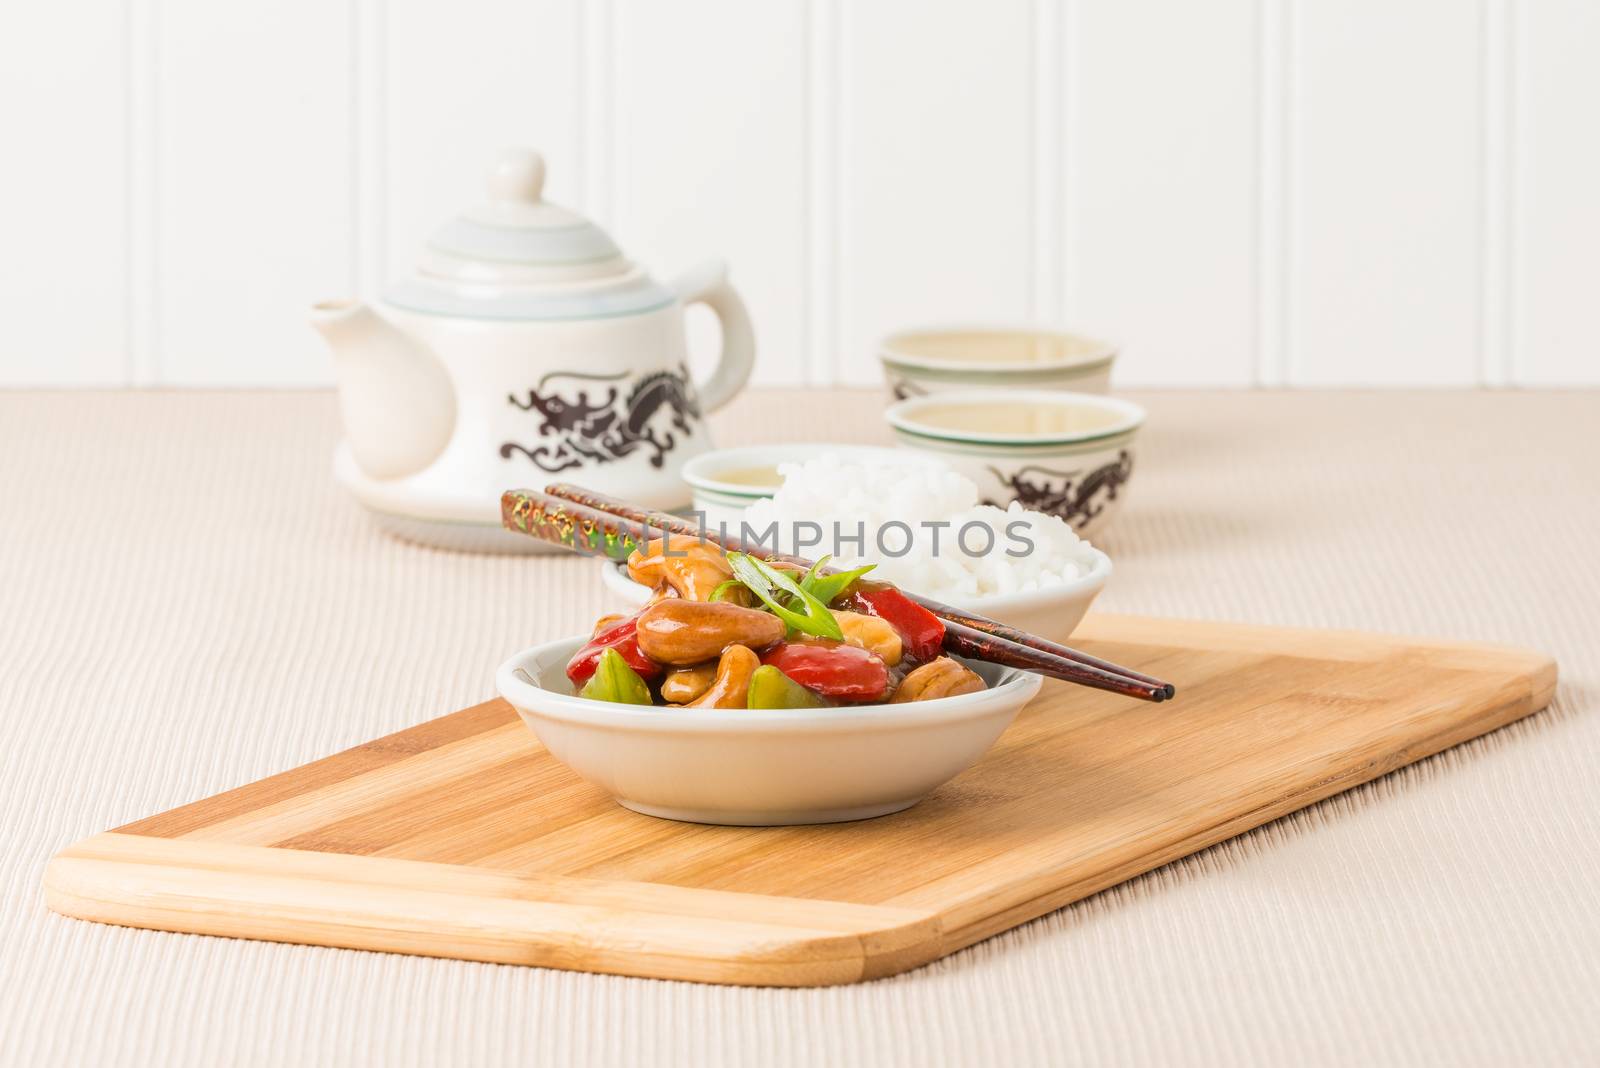 Cashew Chicken and Rice by billberryphotography